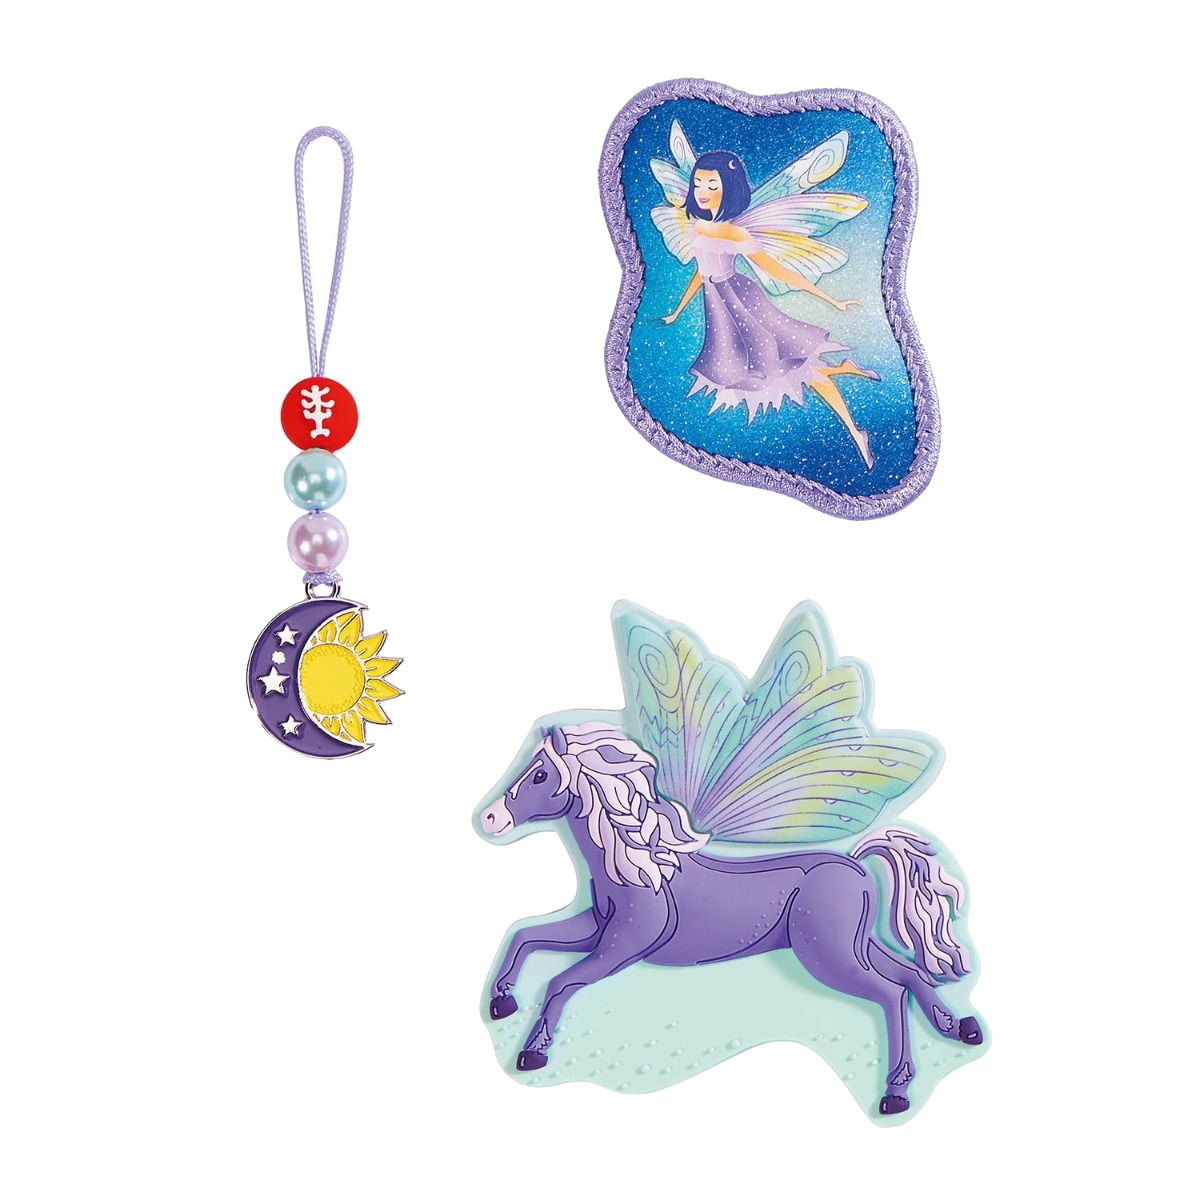 Step by Step 'Magic Mags' Wechselmotive Pegasus Emily